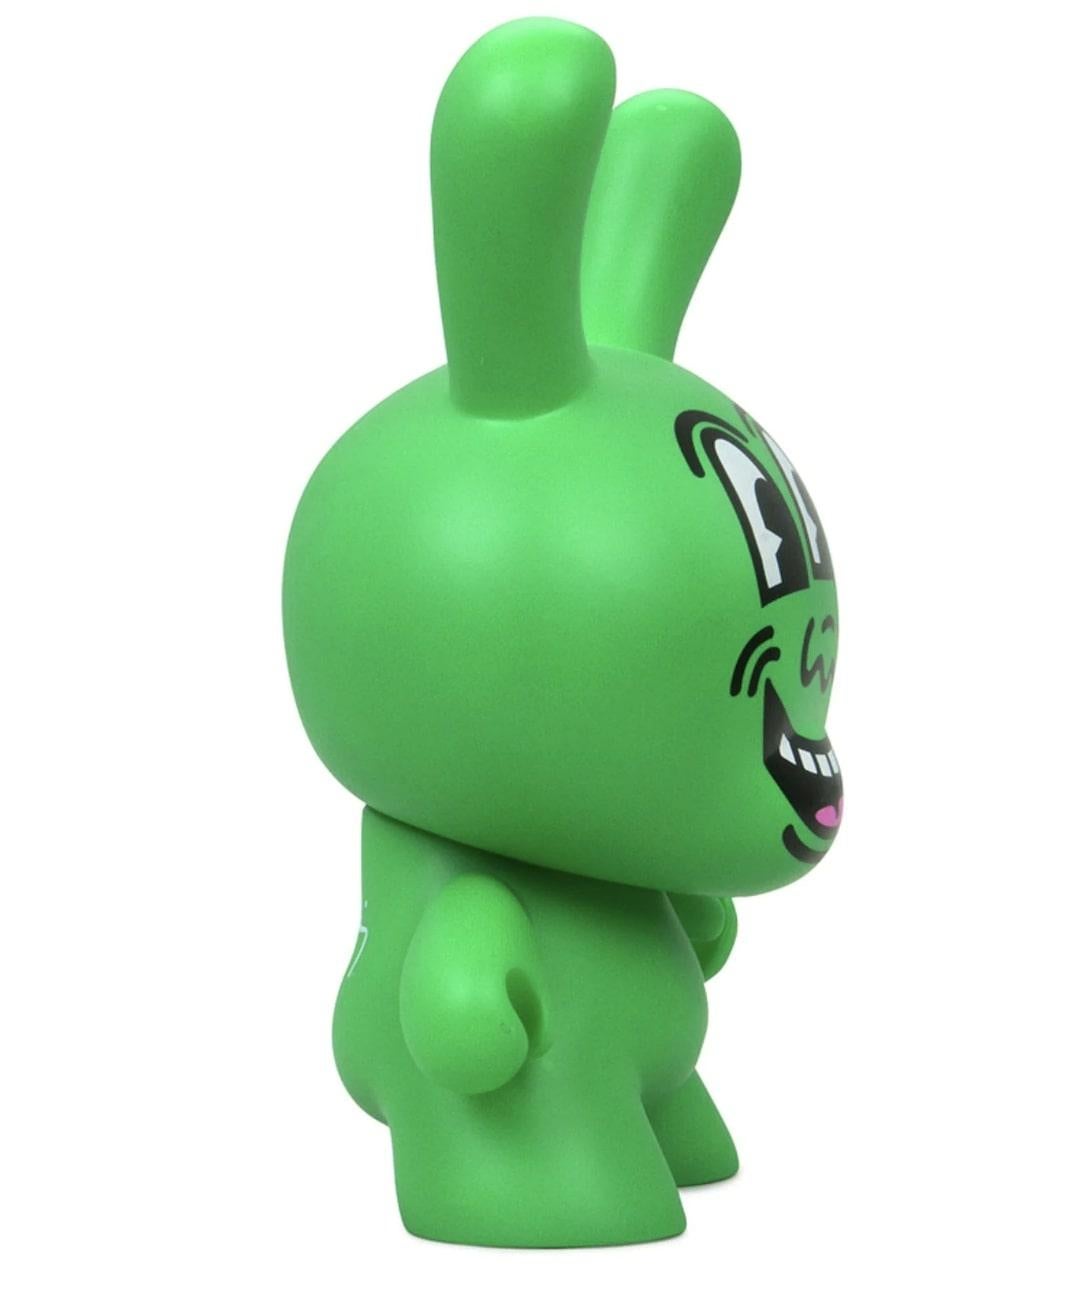 A celebration of inspirational artists of the 20th century, Kidrobot brings art to life with the collection featuring the work of Kidrobot x Keith Haring Kidrobot is proud to introduce a Dunny featuring the work Three Eyed Face. This Keith Haring